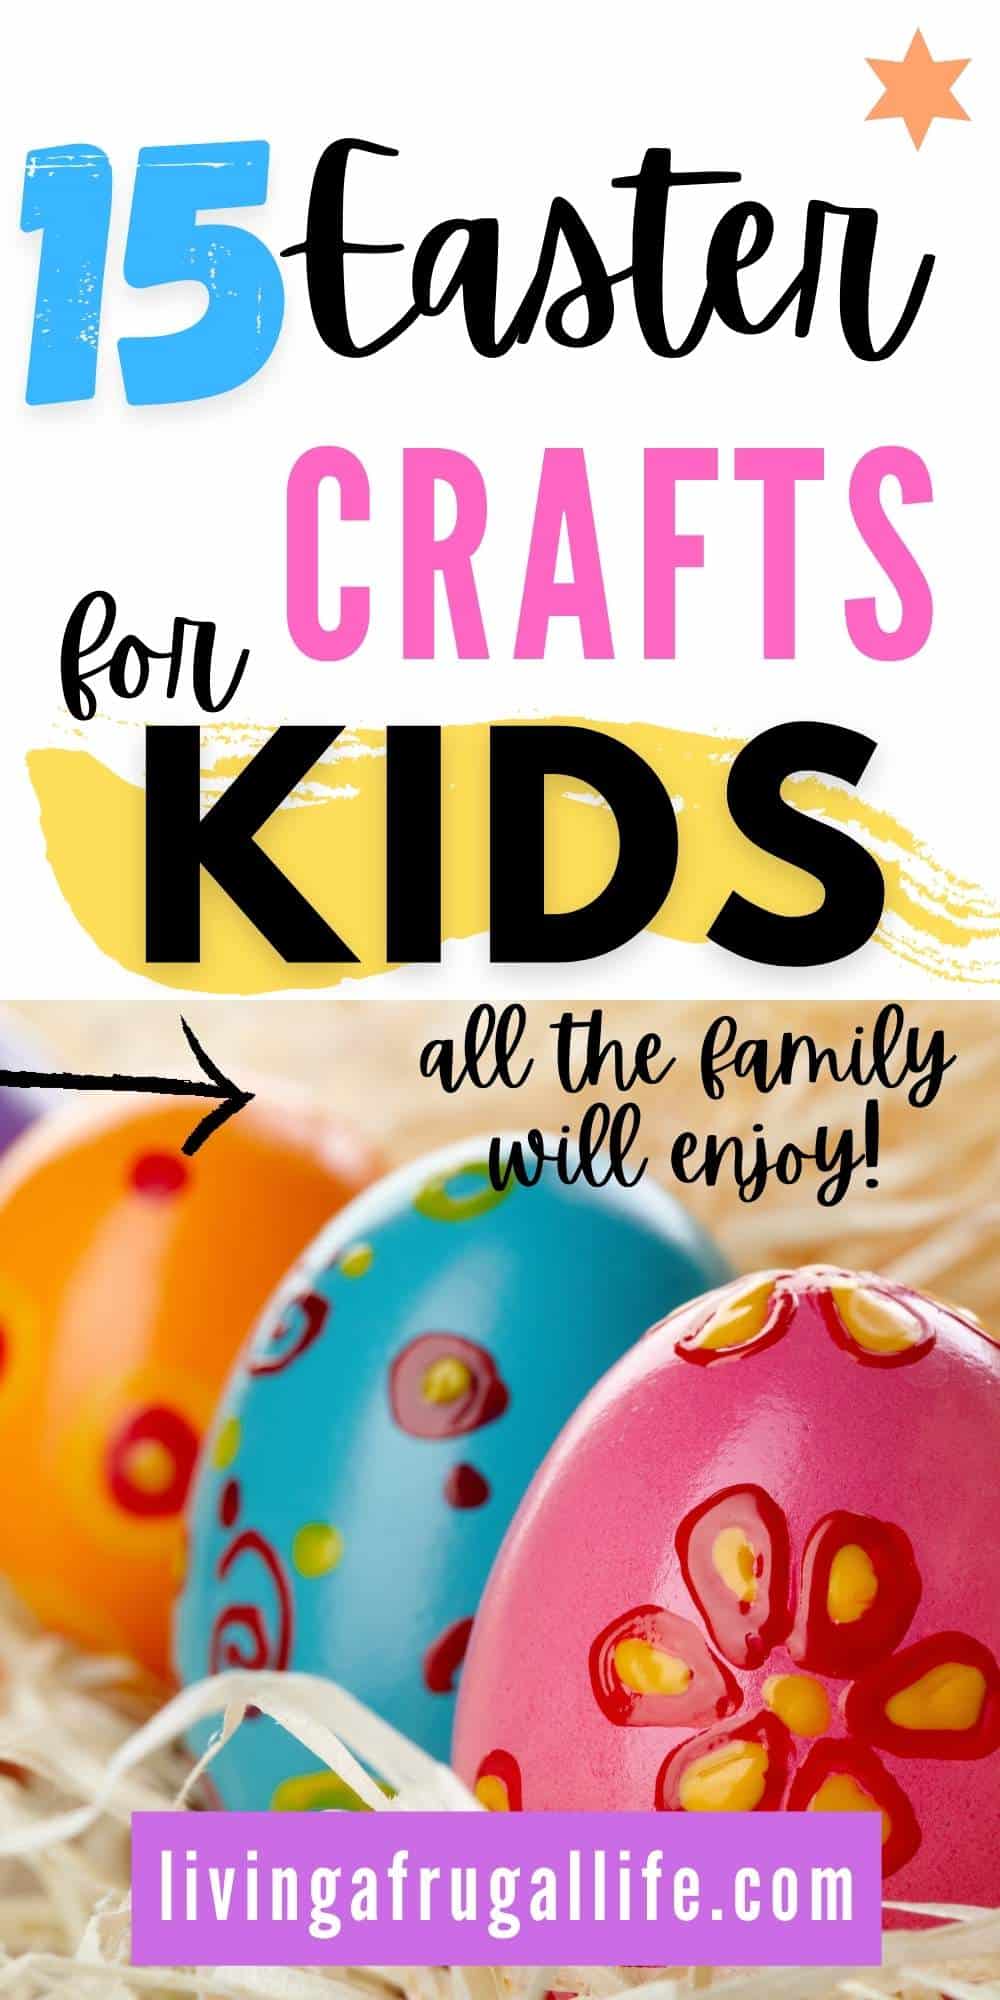 12 Pack Easter Egg Ornaments Paint Craft For Kids- Easter Basket Fillers,  Party Favors, Painting Eggs Easter Gift 